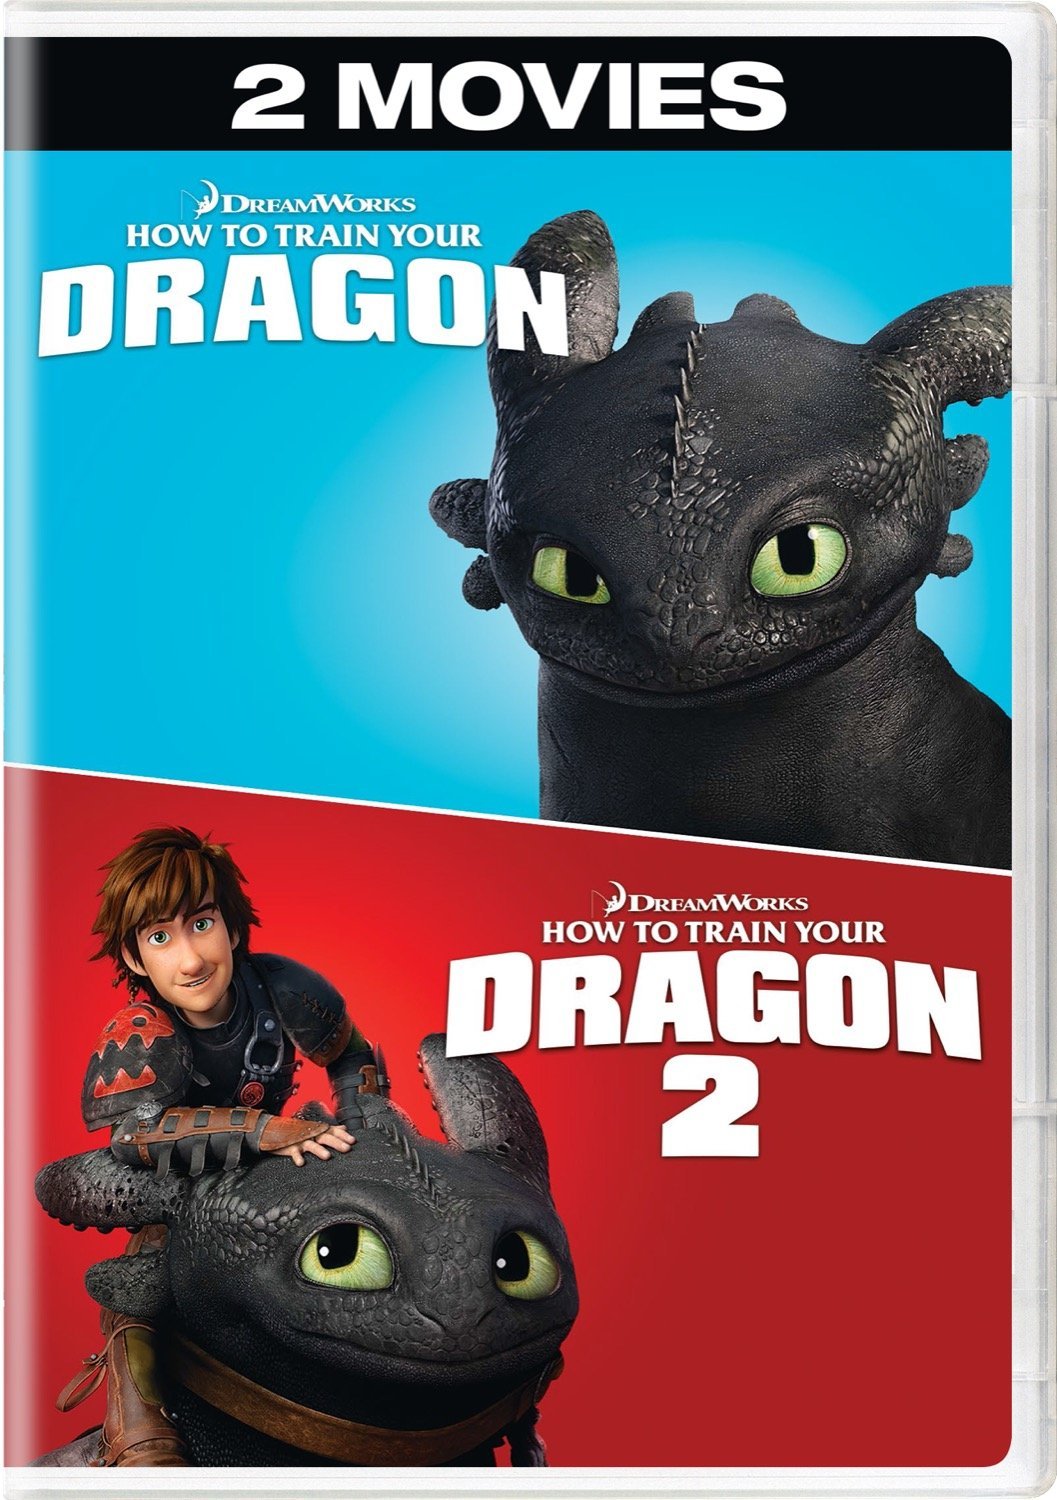 How to Train Your Dragon / How to Train Your Dragon 2 - DVD [ 2014 ] - Children Movies on DVD